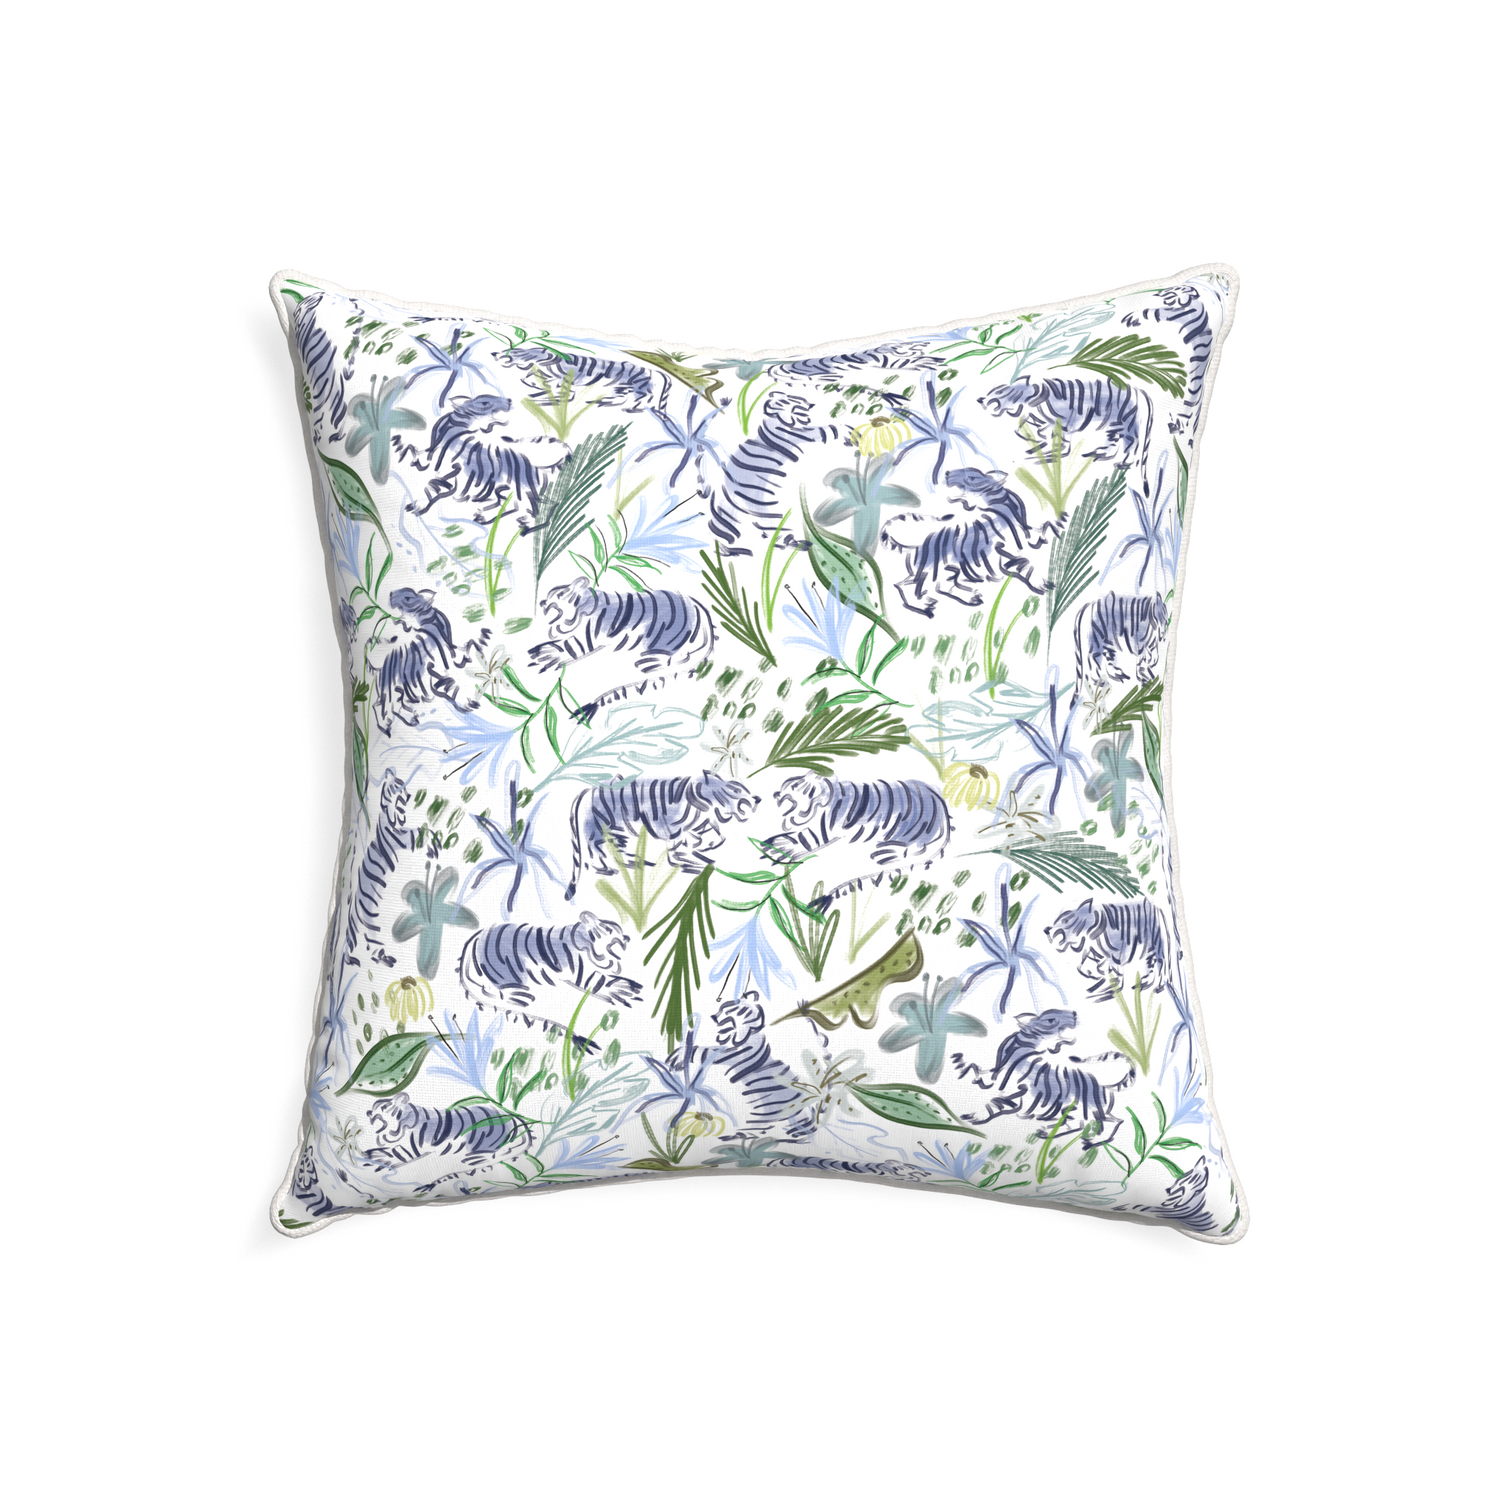 22-square frida green custom pillow with snow piping on white background